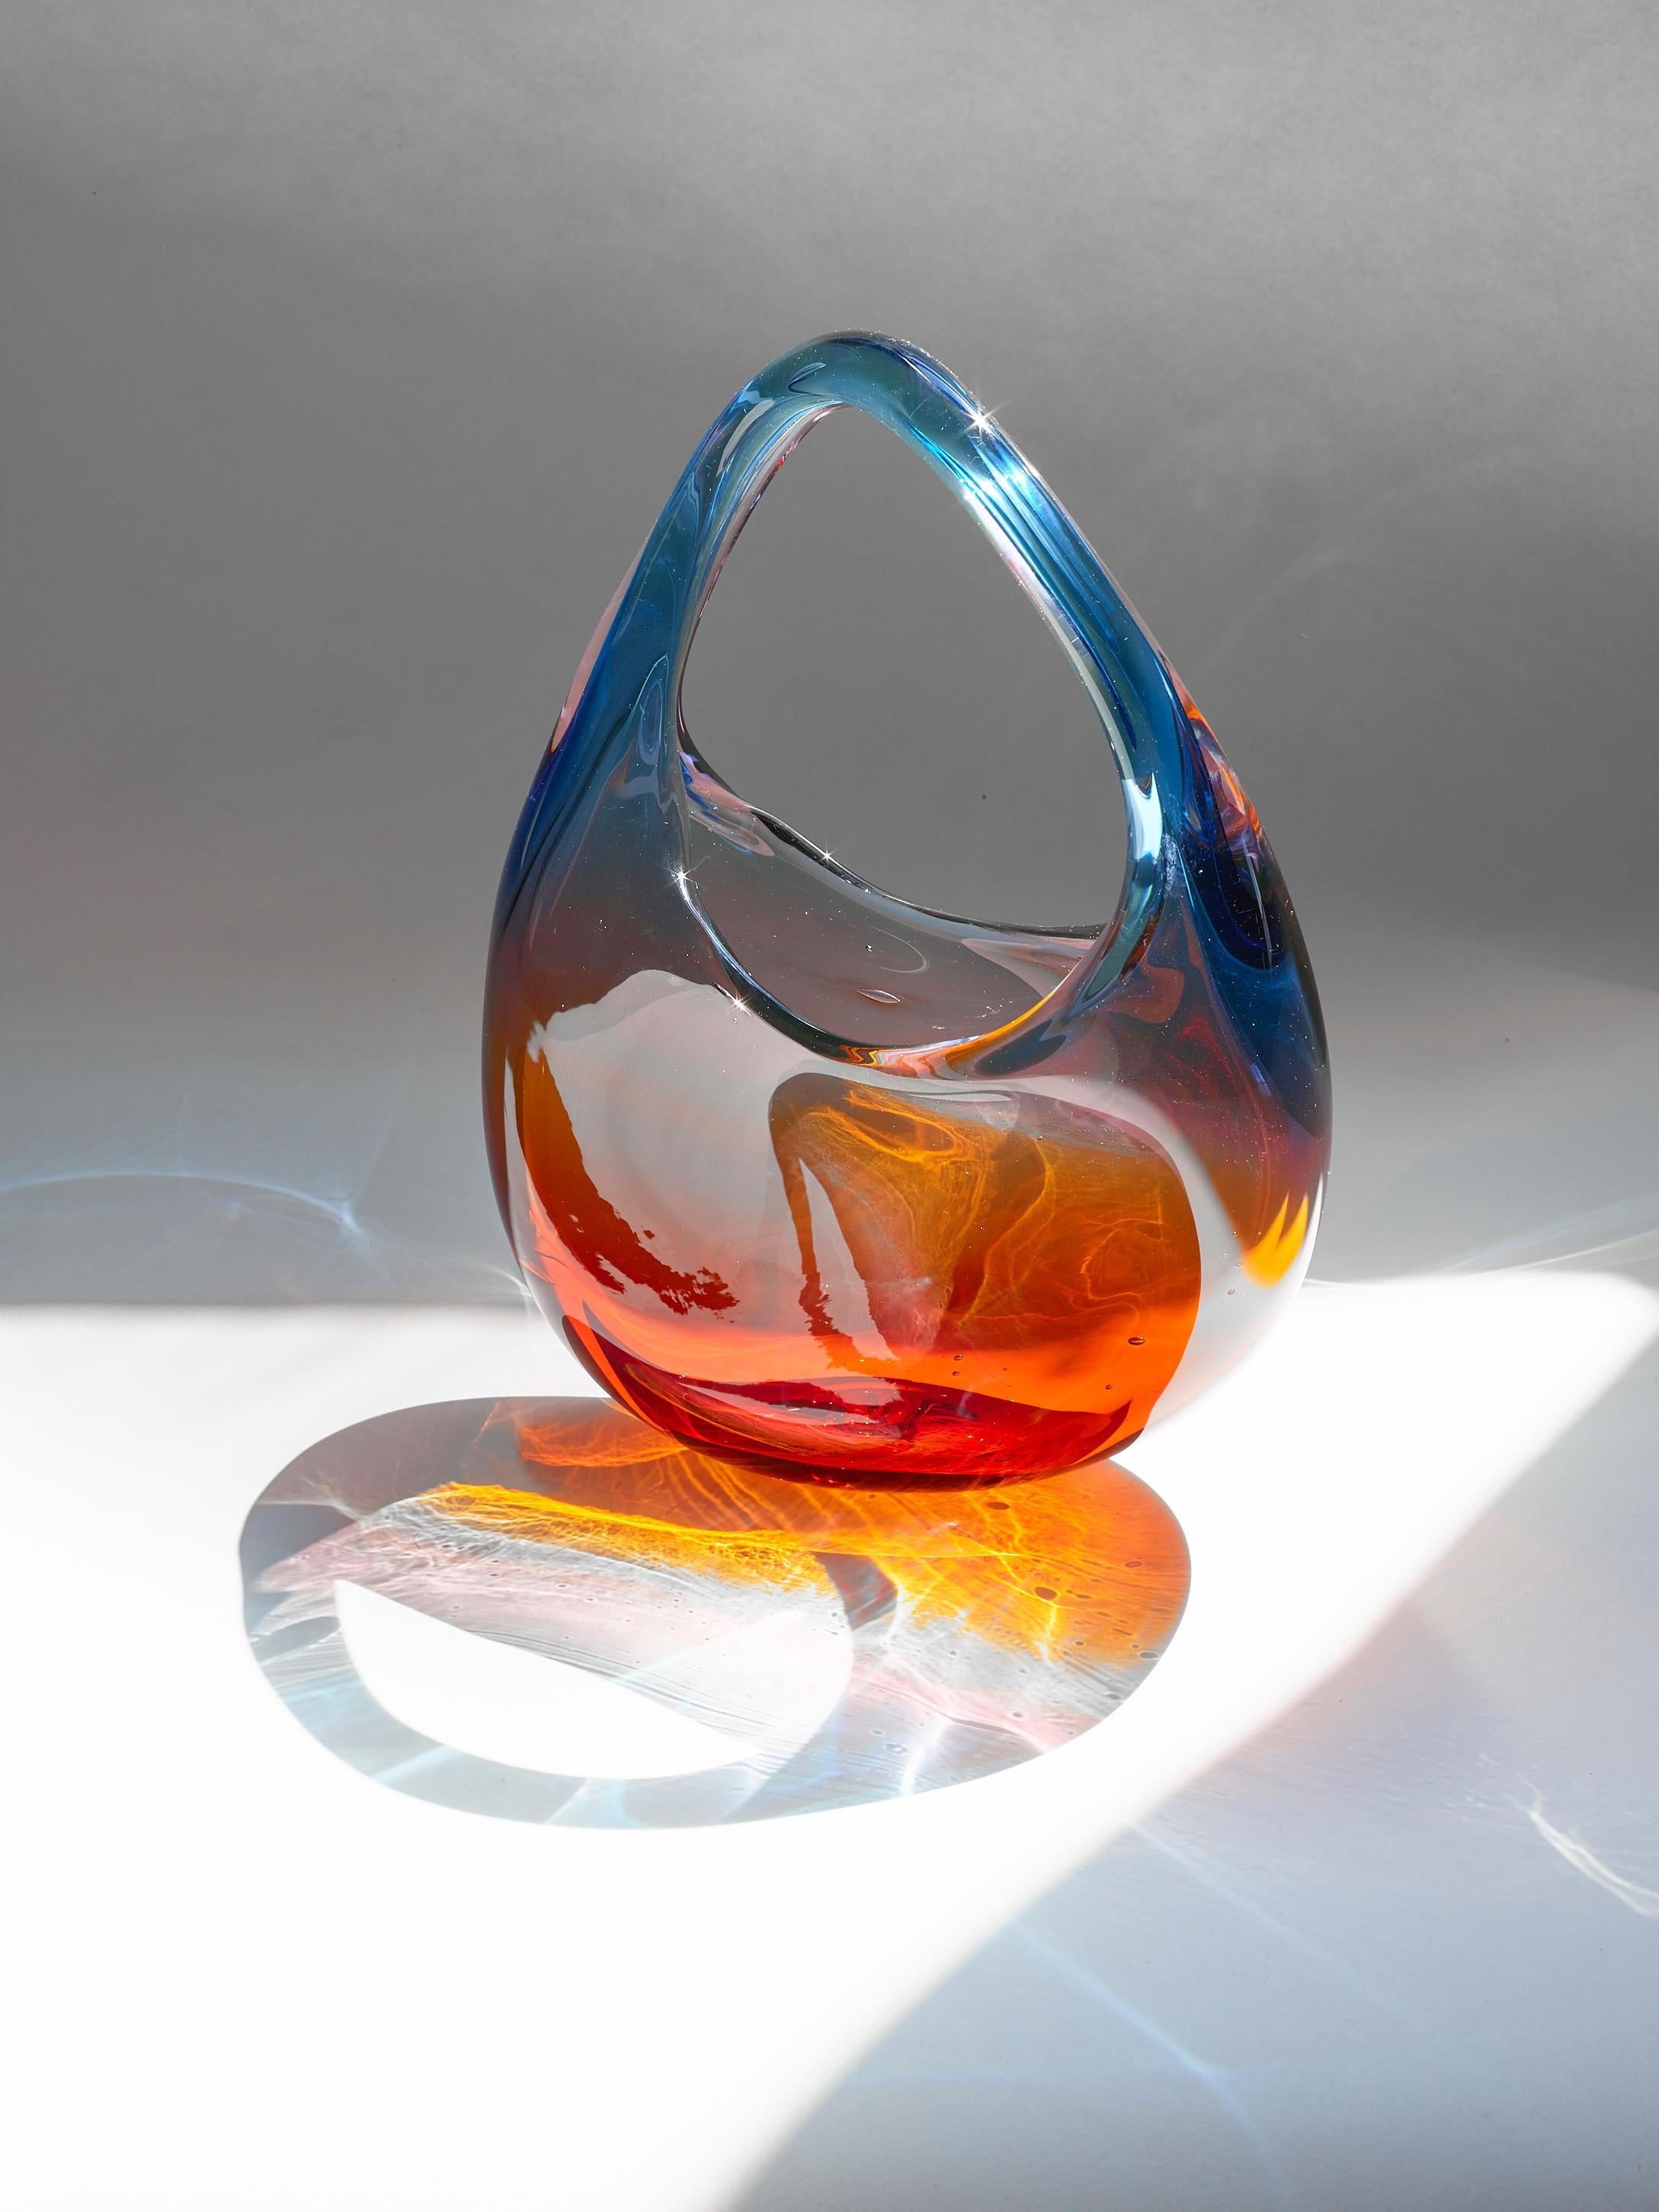 Other Glass Handbag with Blue and Amber Fade by Raiffe